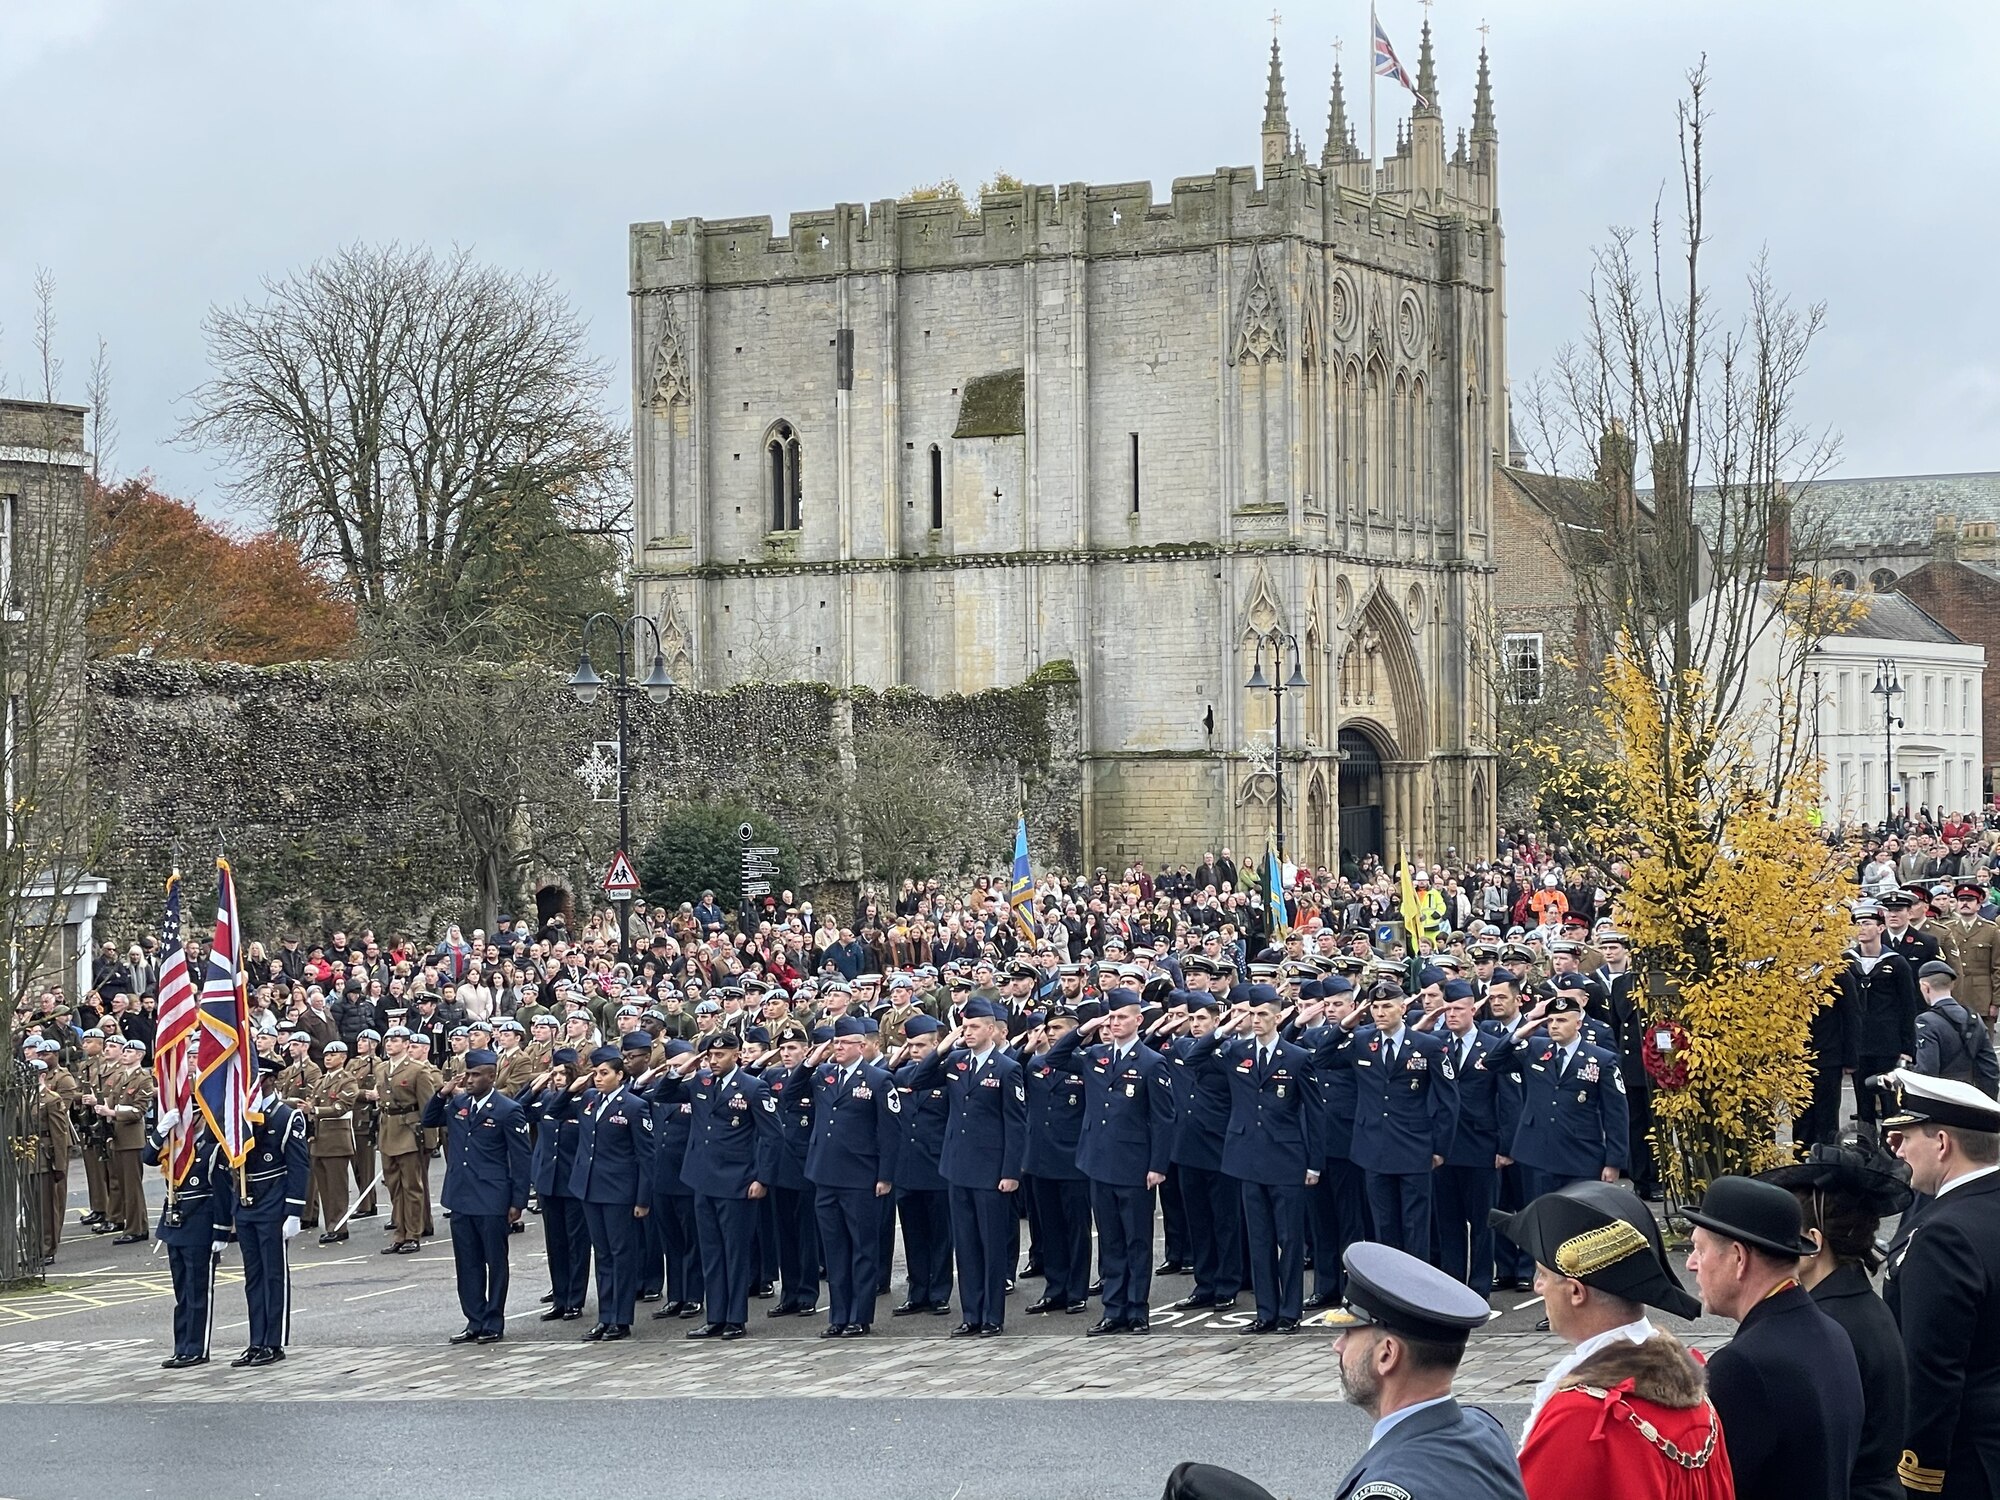 Remembrance is held on November of each year to honor members of the armed forces who have died in wars and other military conflicts since the onset of World War I.